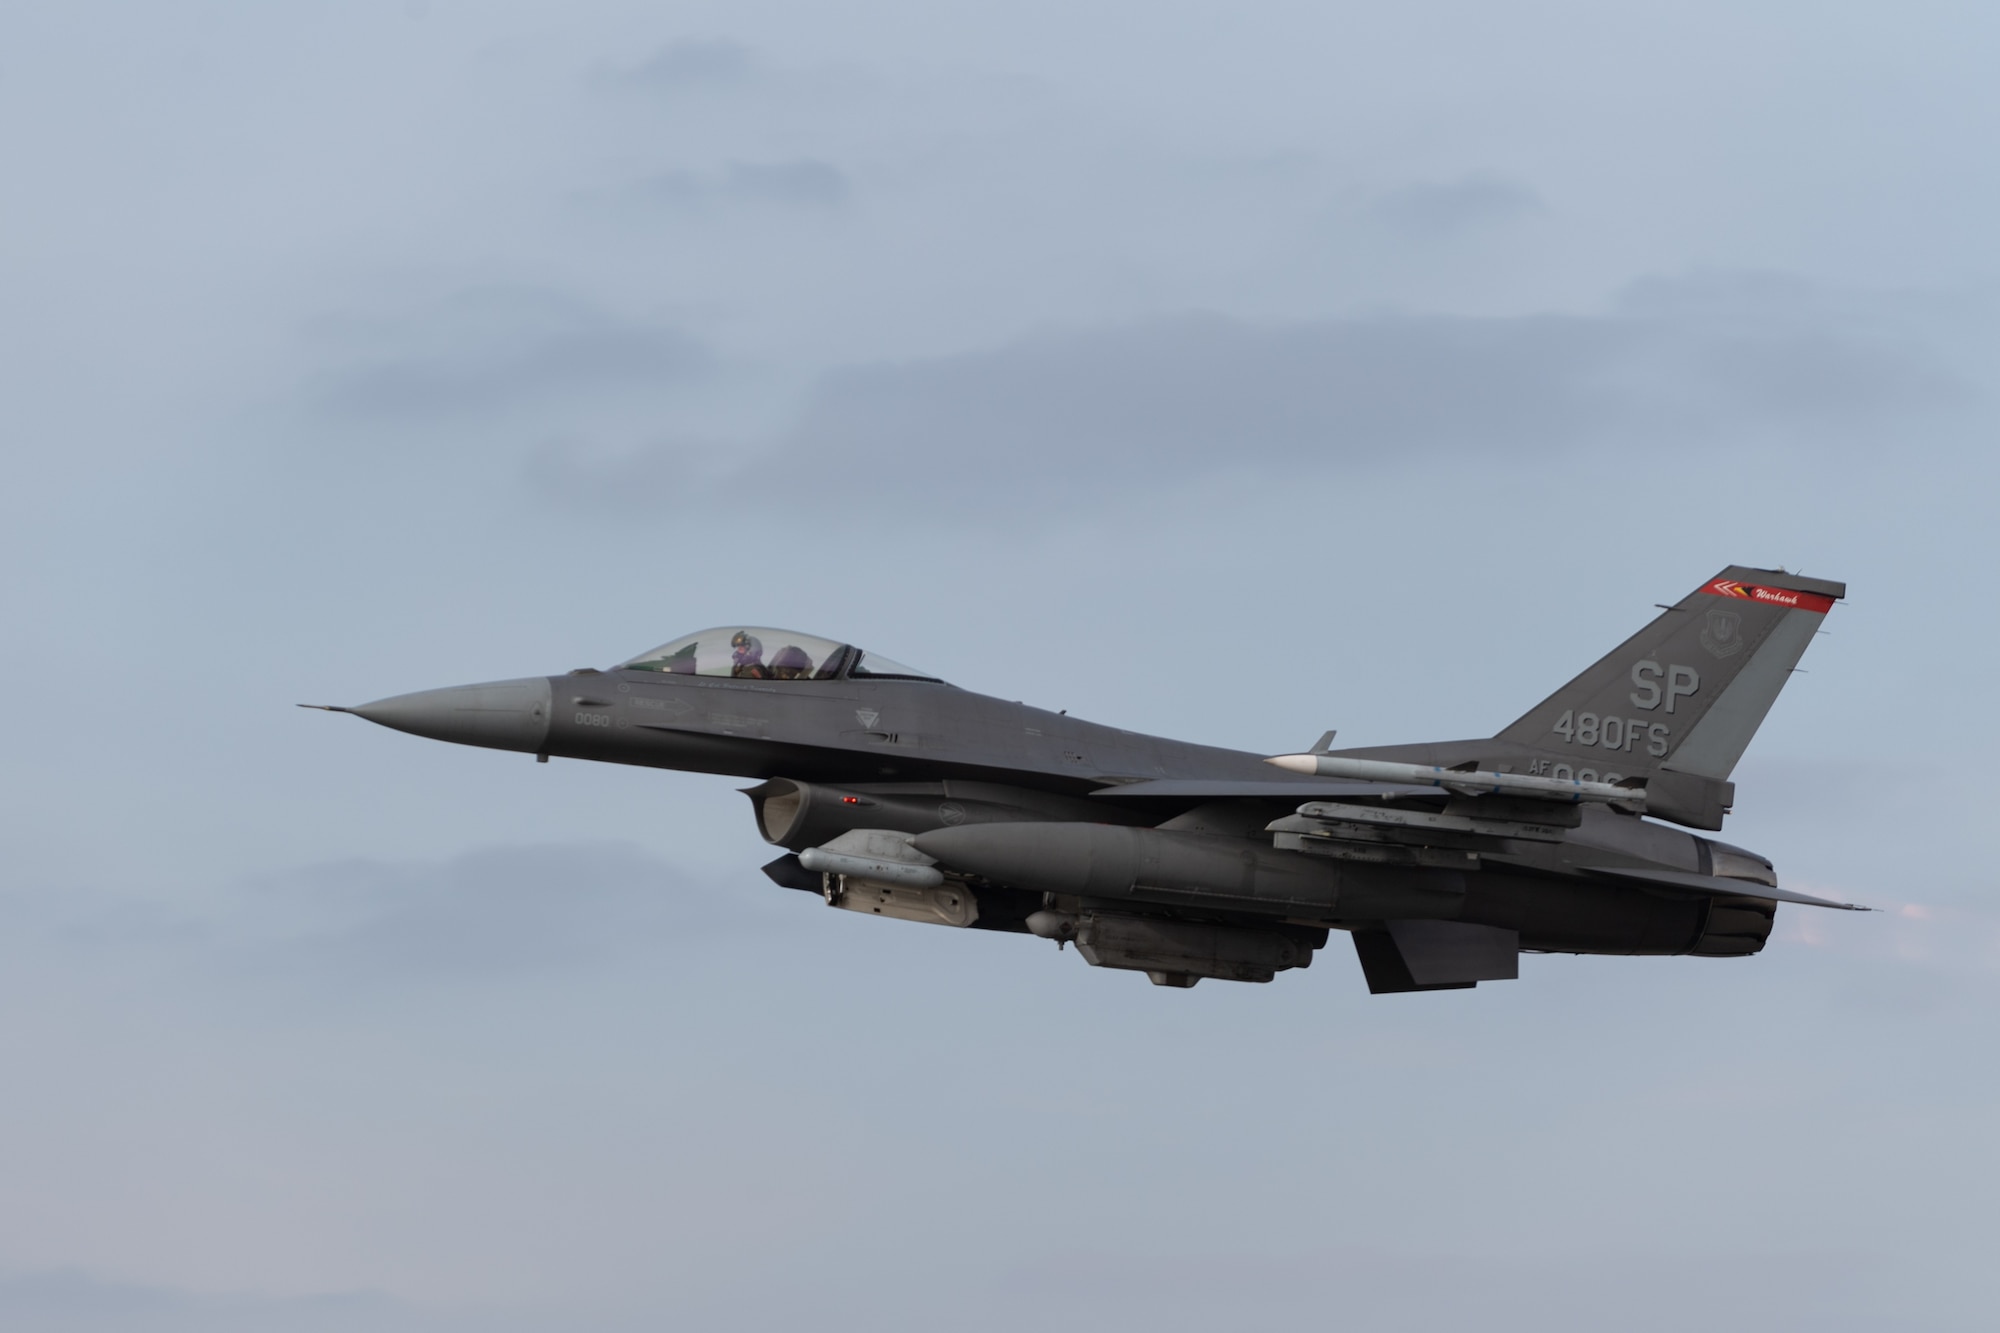 A U.S. Air Force F-16 Fighting Falcon aircraft from the 480th Fighter Squadron takes off during an Agile Combat Employment exercise at Ramstein Air Base, Germany, March 23, 2021. The exercise, which ran from March 22-26, featured jets flying two missions a day. (U.S. Air Force photo by Senior Airman John Wright.)